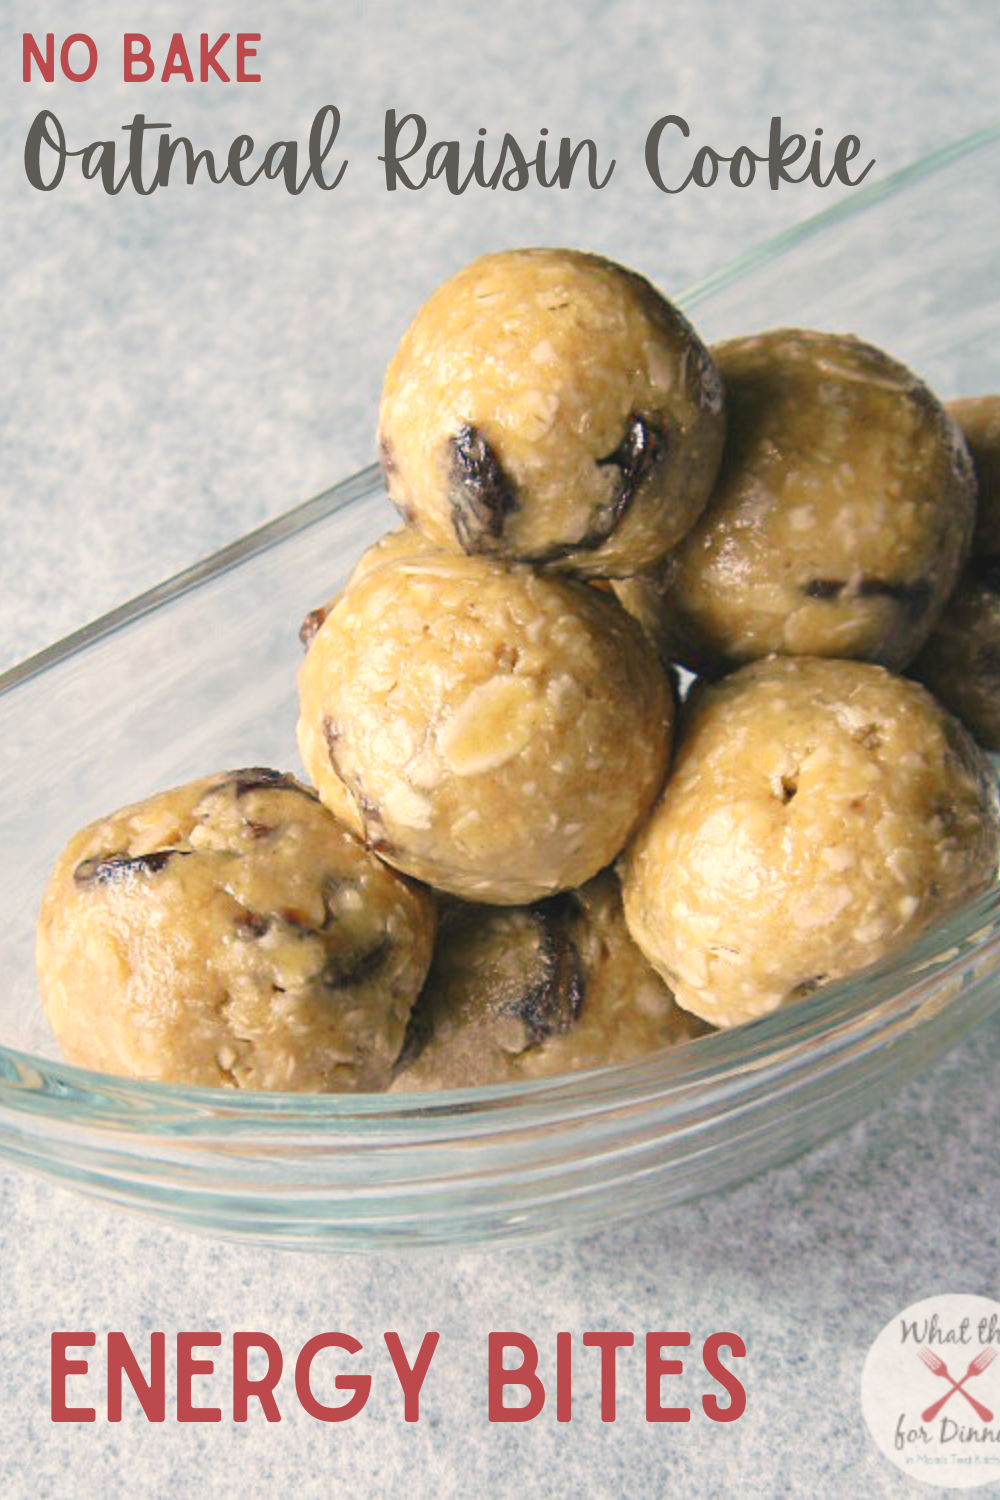 These No Bake Energy Bites packed with all the delicious flavors of an oatmeal raisin cookie are the perfect healthy after school snack for the kids